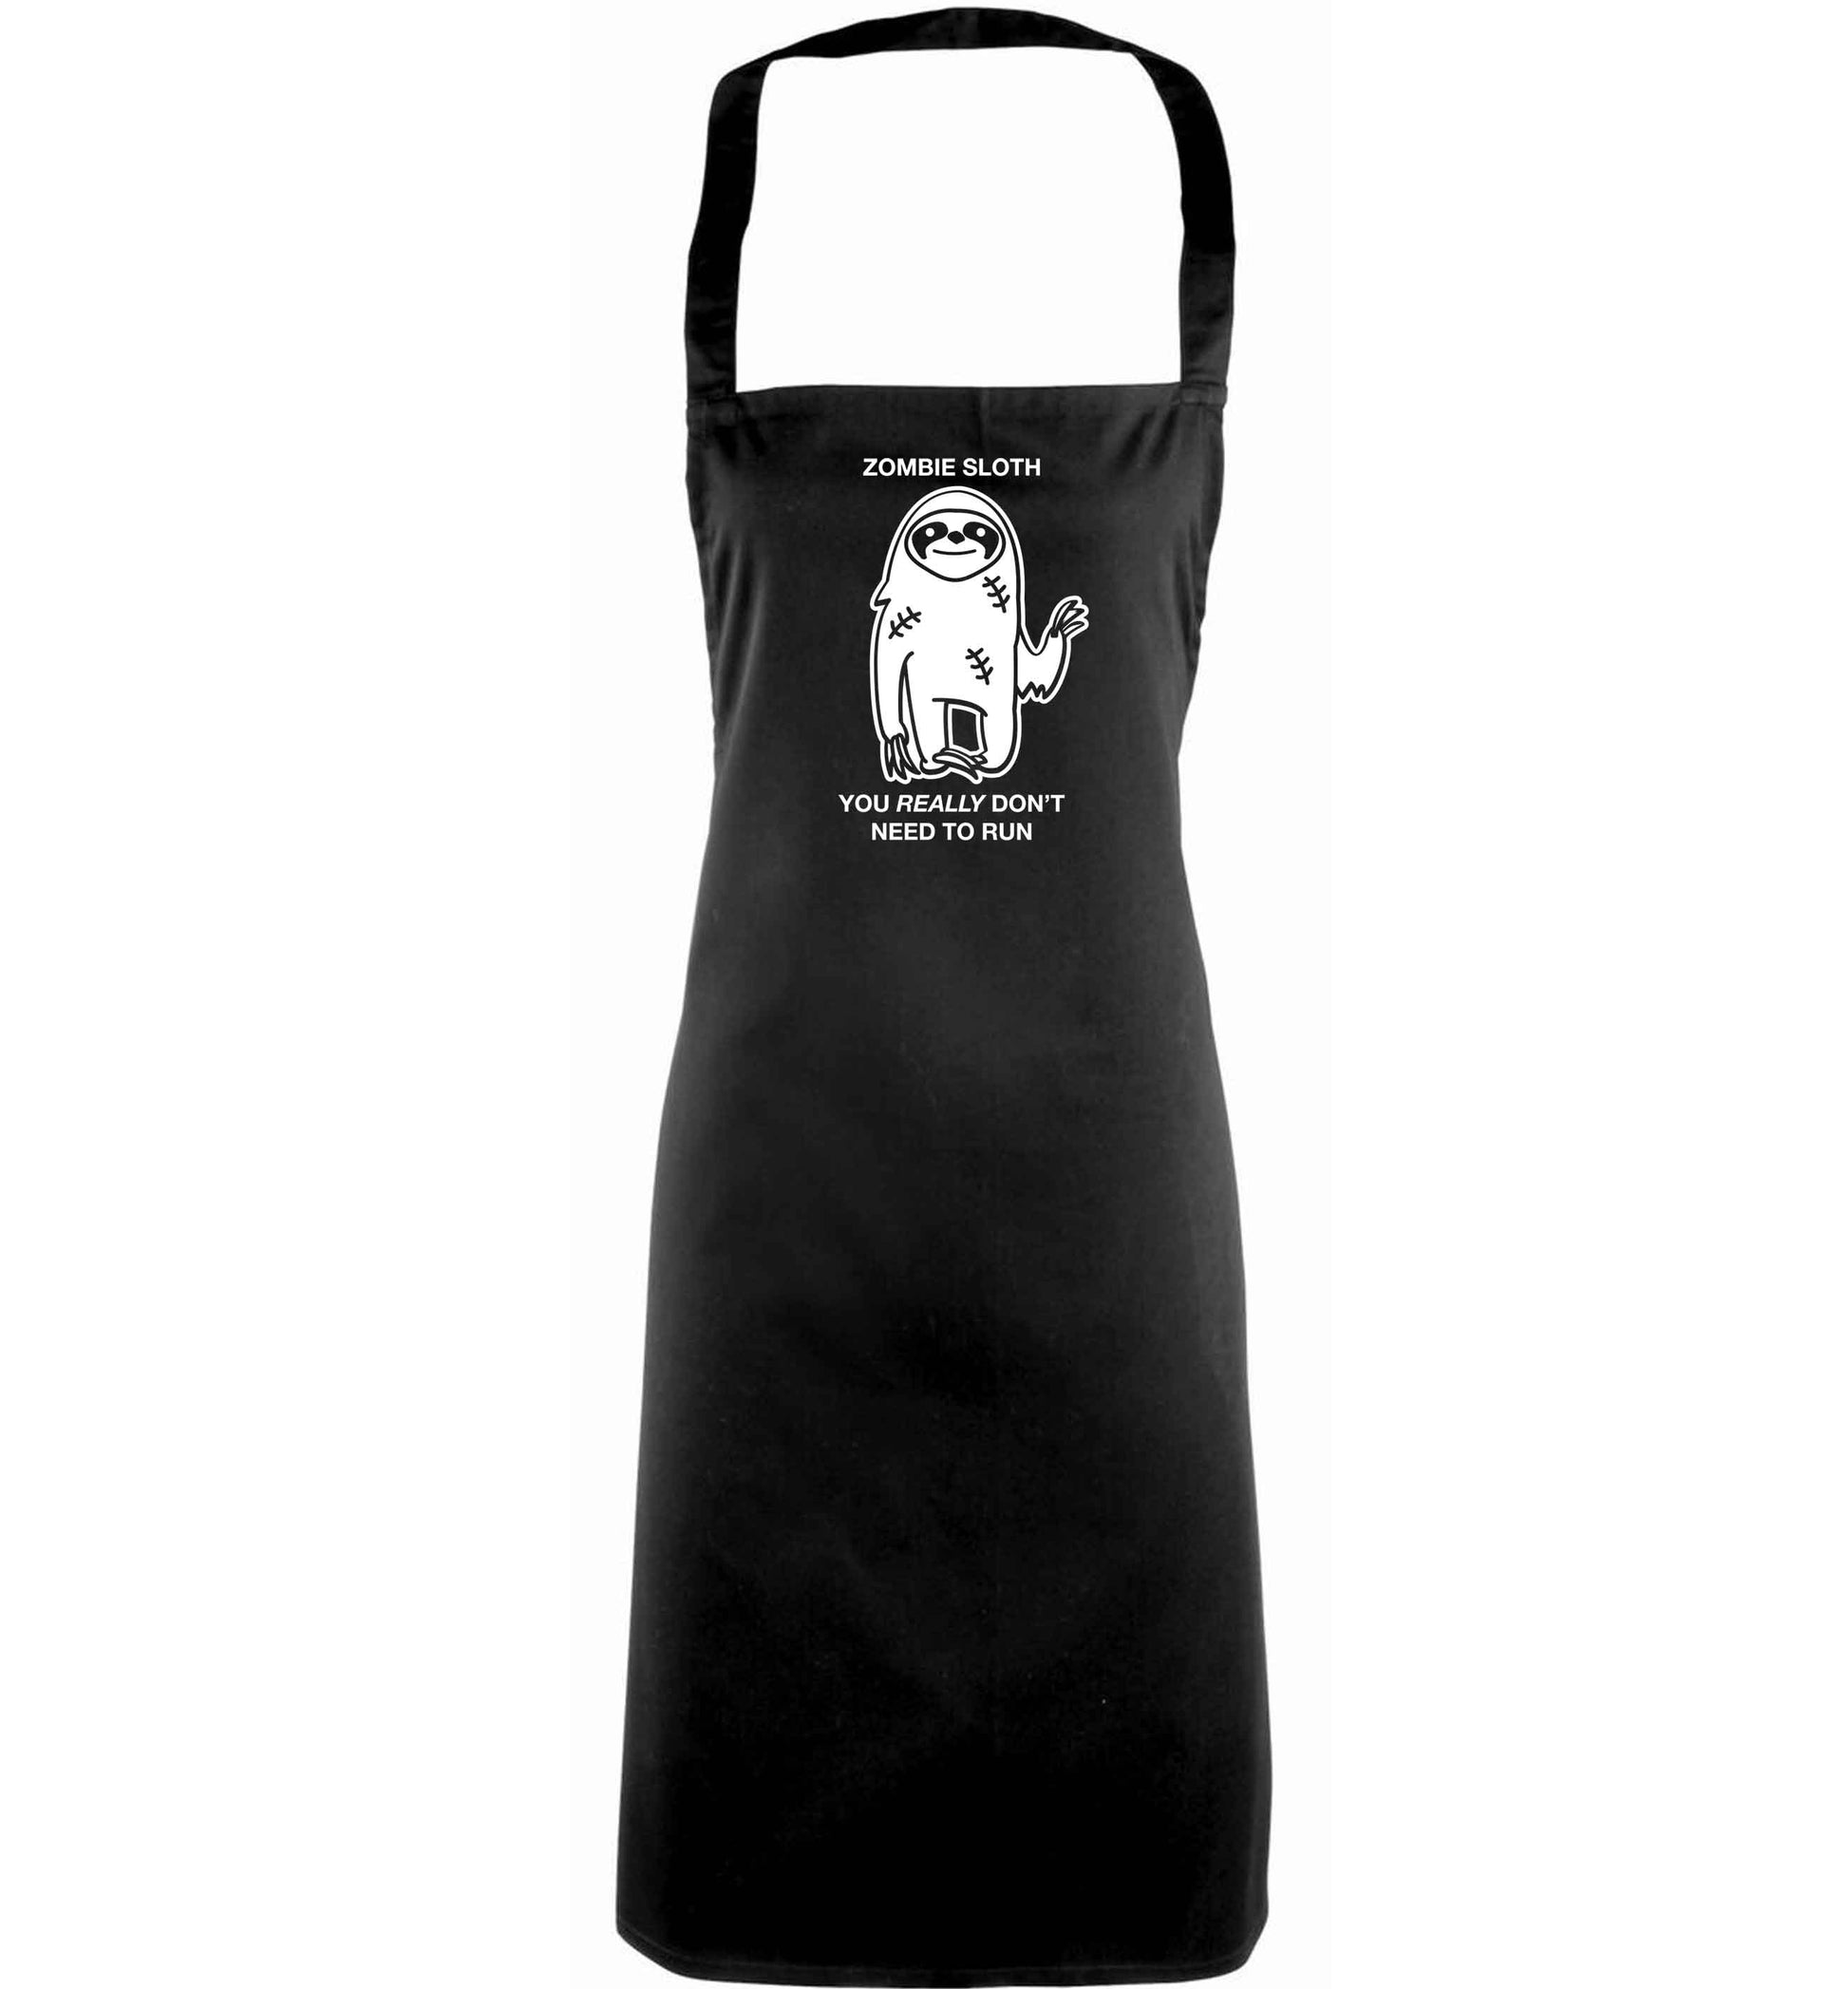 Zombie sloth you really don't need to run adults black apron